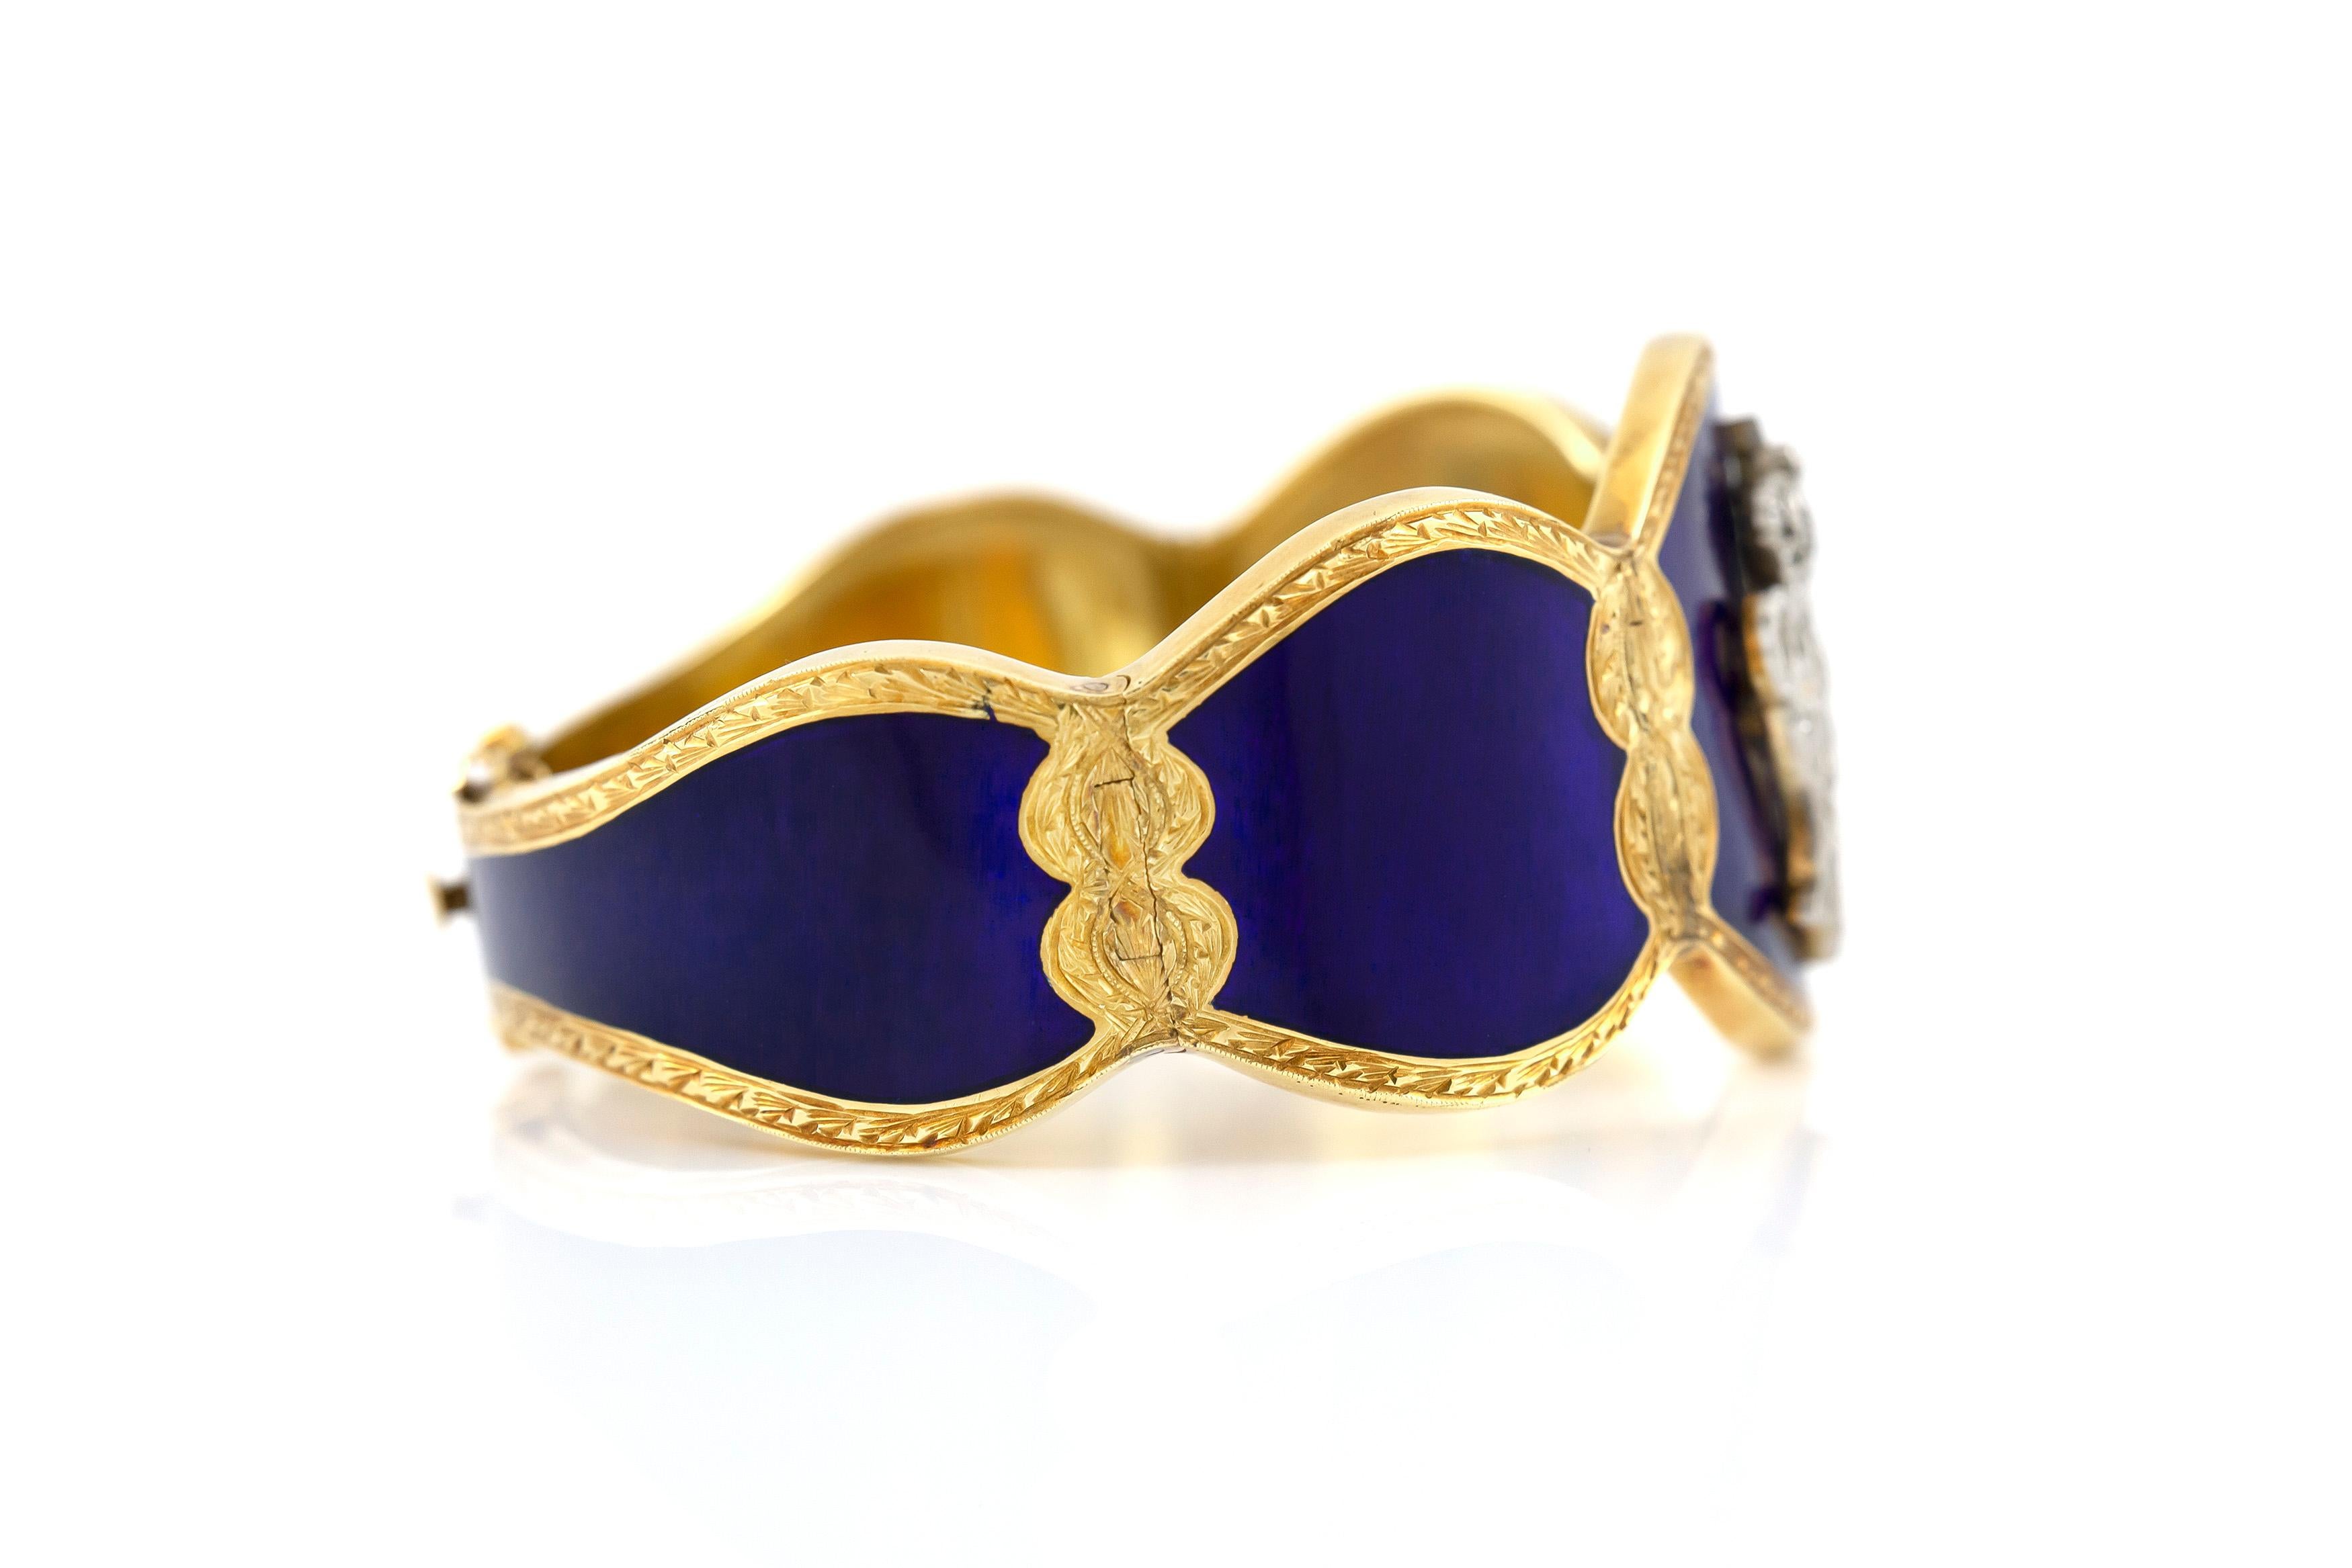 The bracelet is finely crafted in 18k yellow gold with blue enamel and diamonds weighing approximately total of 0.30 carat and all whole bracelet is weighing approximately total of 50.7 gram.